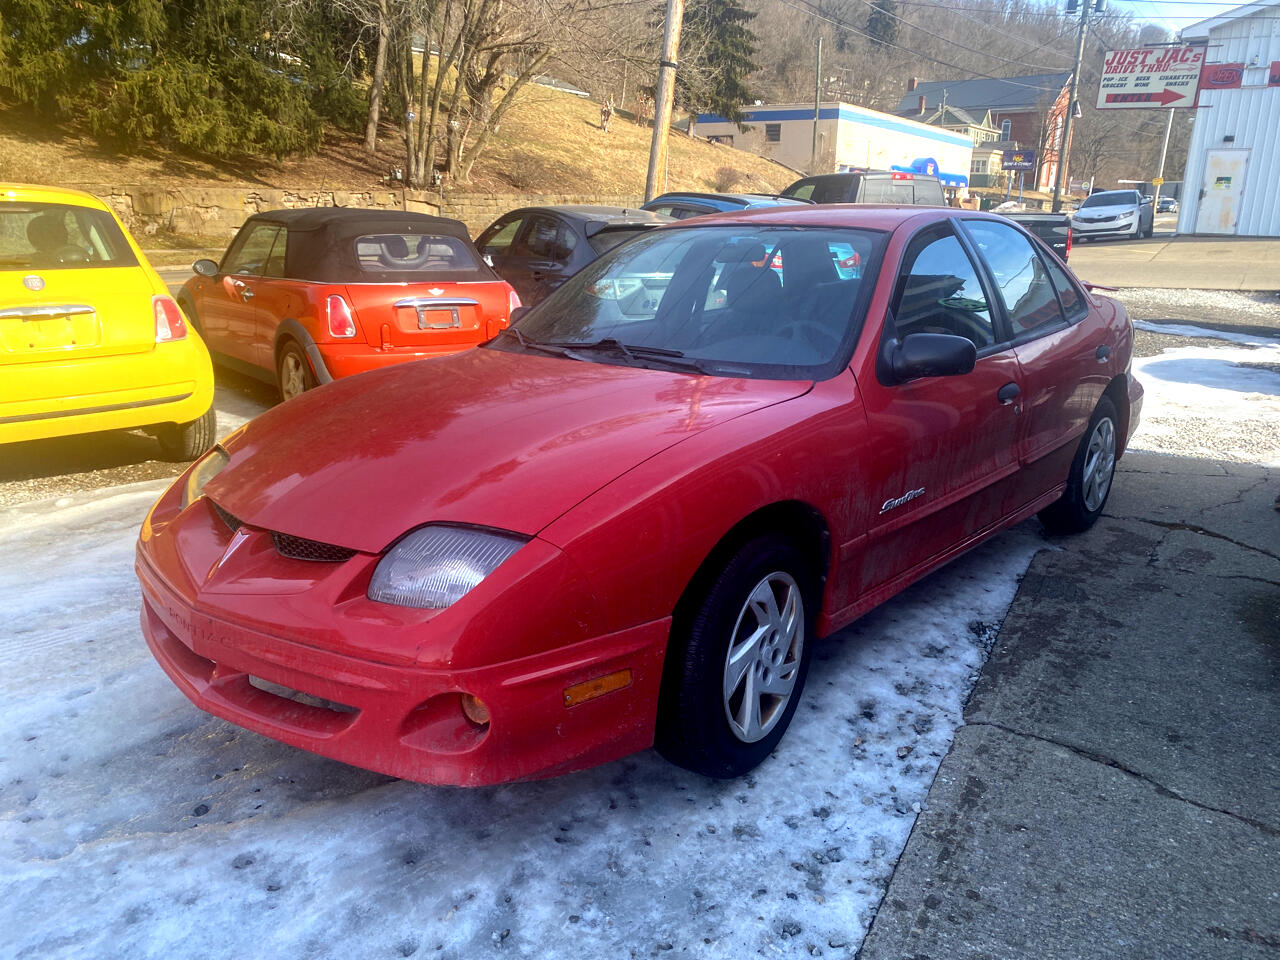 Used 2000 Pontiac Sunfire SE sedan for Sale in Bridgeport OH 43912 Cars To  Fit Any Budget